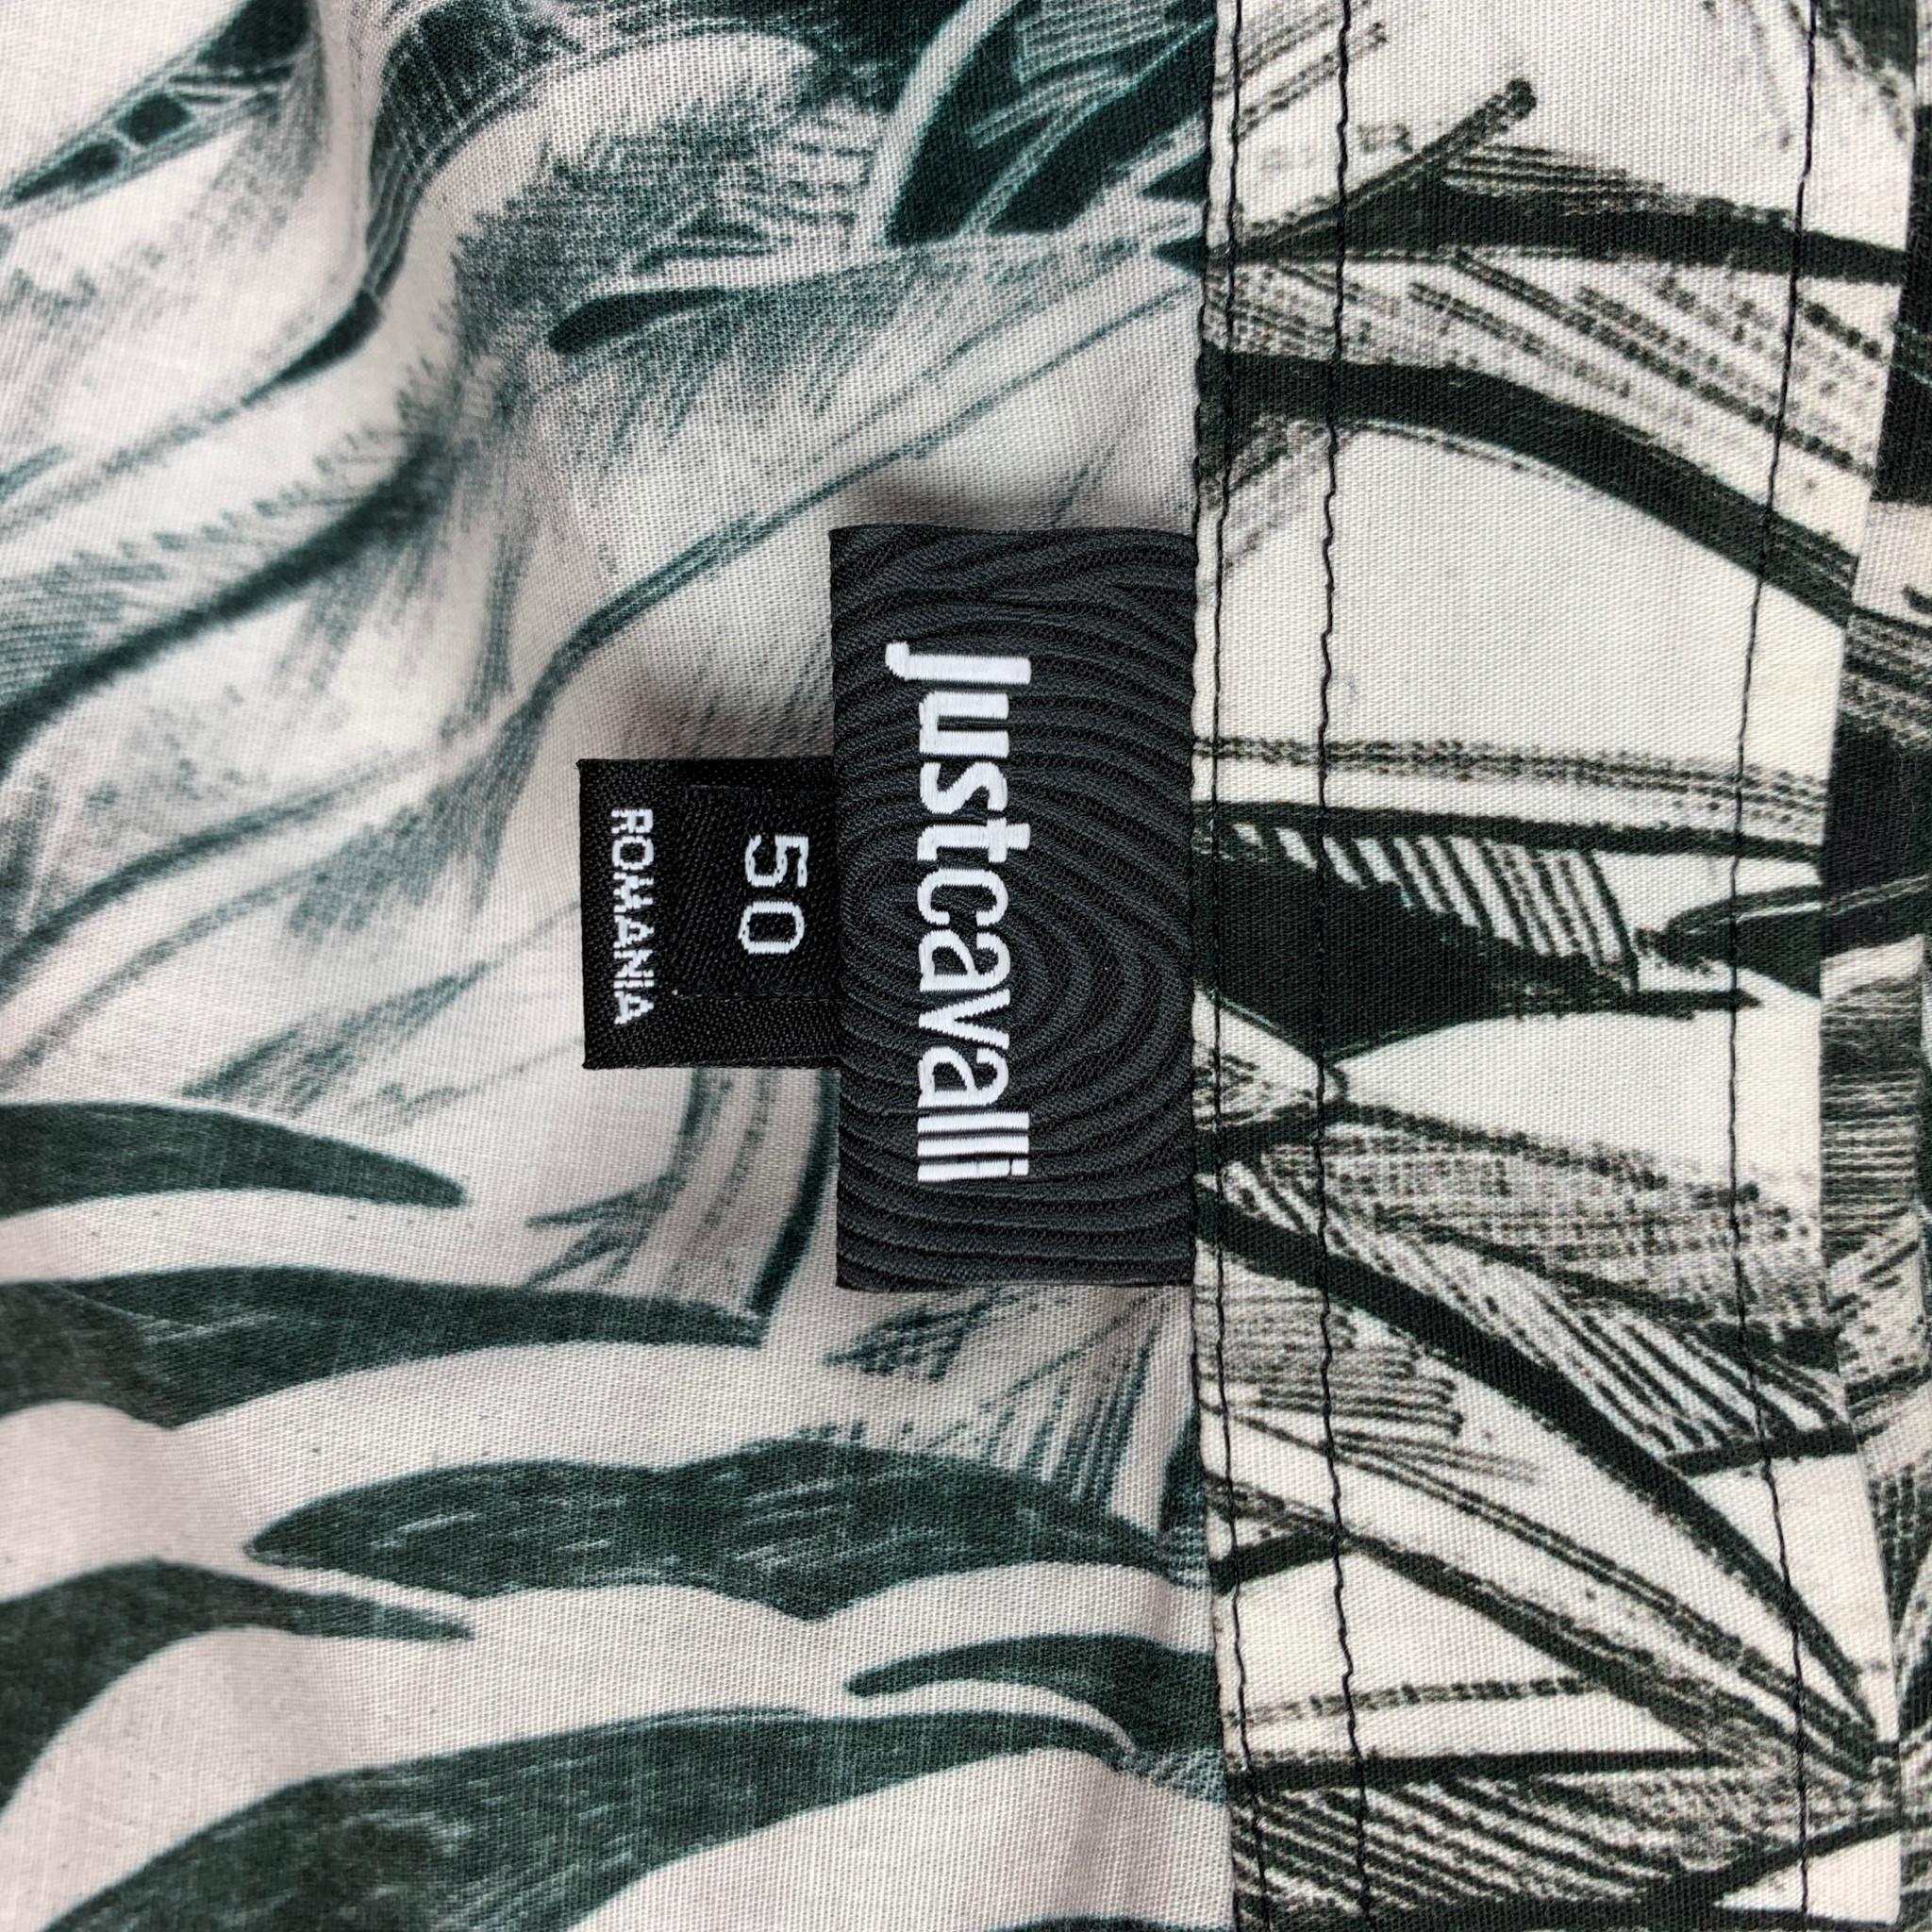 JUST CAVALLI Size M Black & White Abstract Print Cotton Button Up Shirt 2